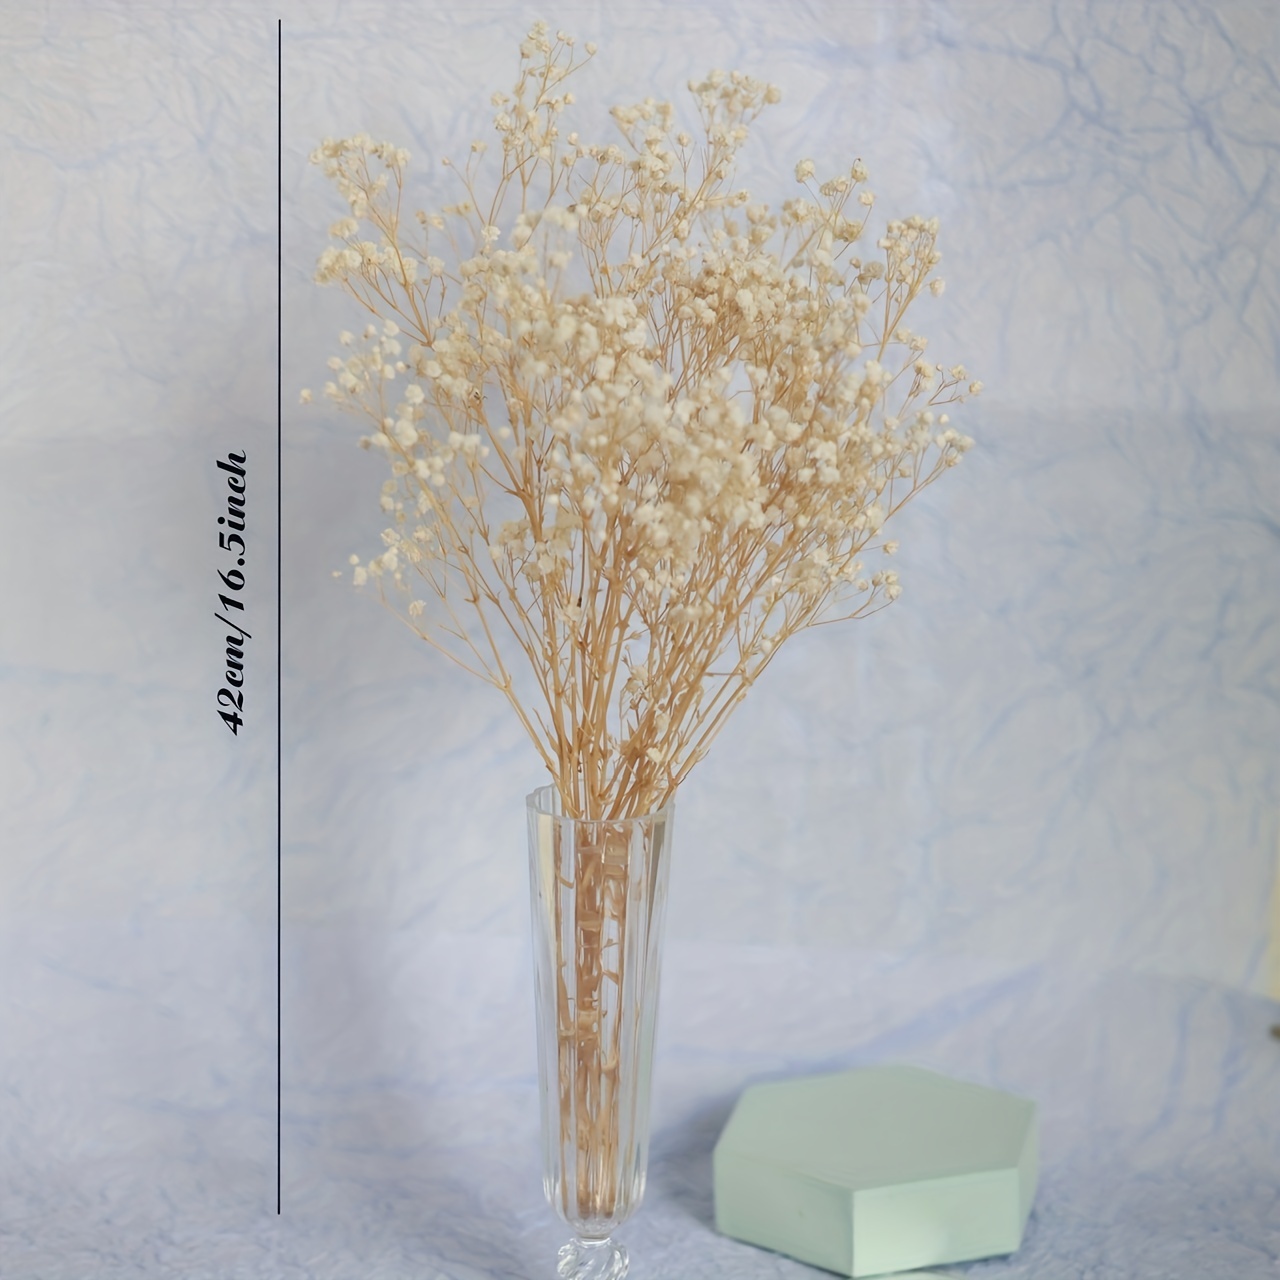 8pcs, Long-Lasting Dried Babys Breath Flowers Bouquet for Weddings, Home  Decor, and DIY Projects